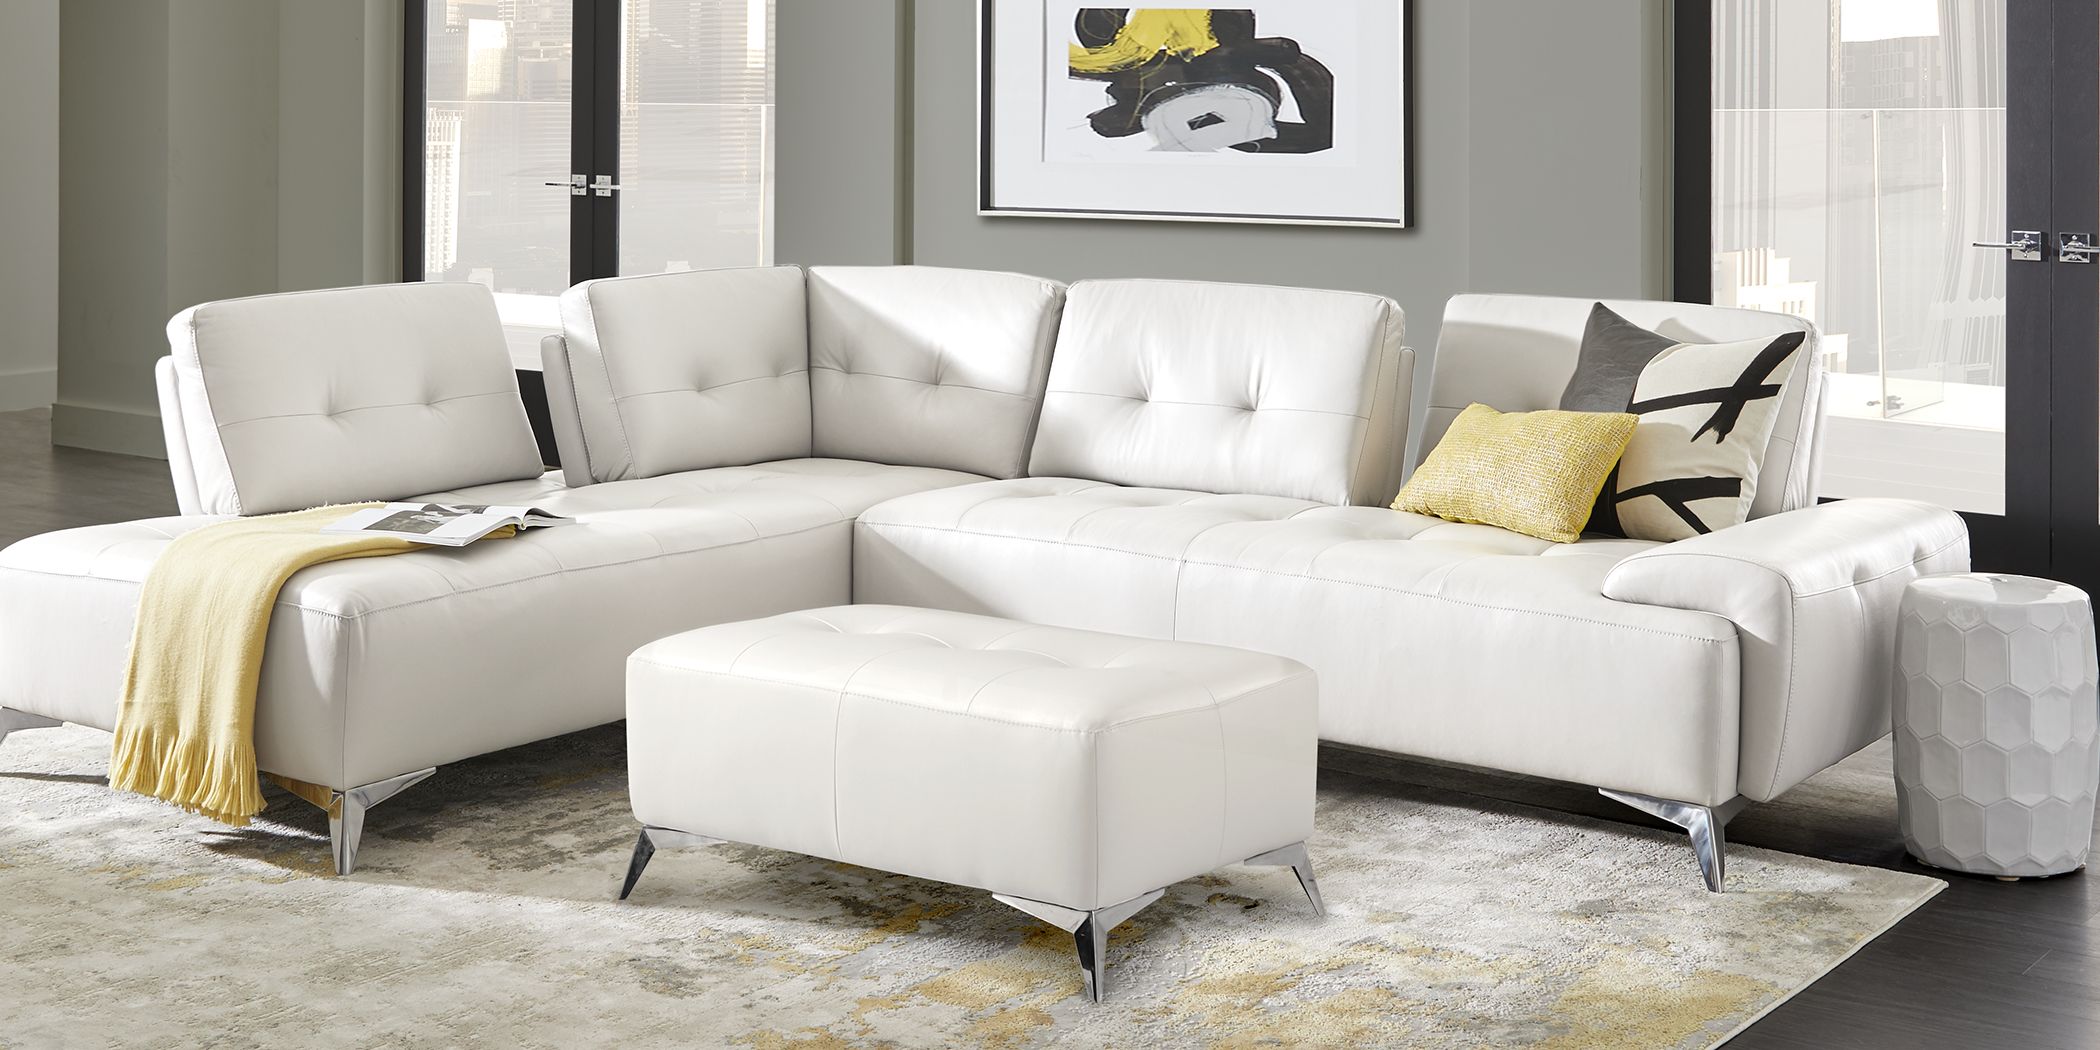 White Leather Living Room Seat Recluner With Light